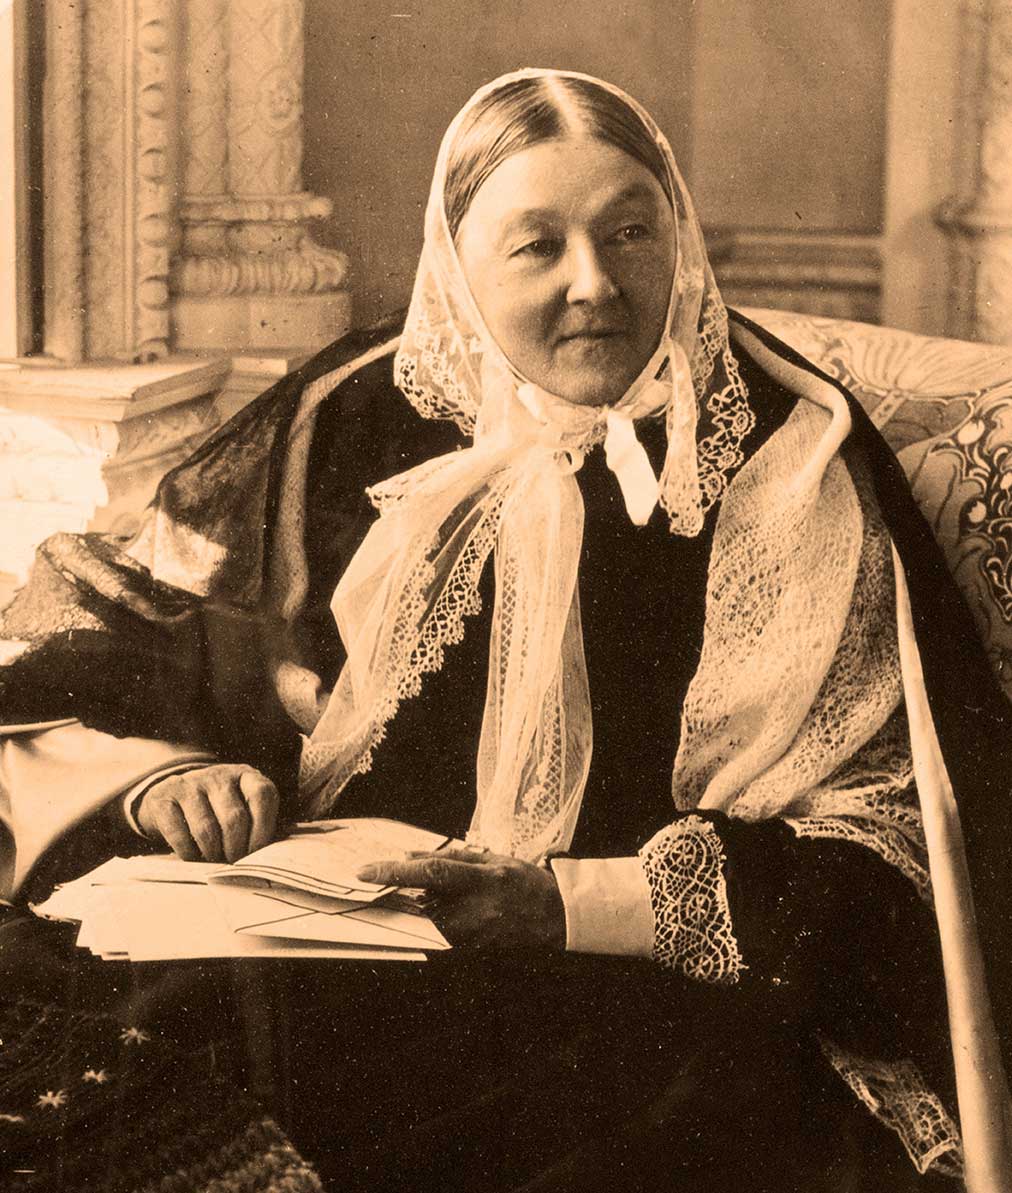 Florence Nightingale in her later years